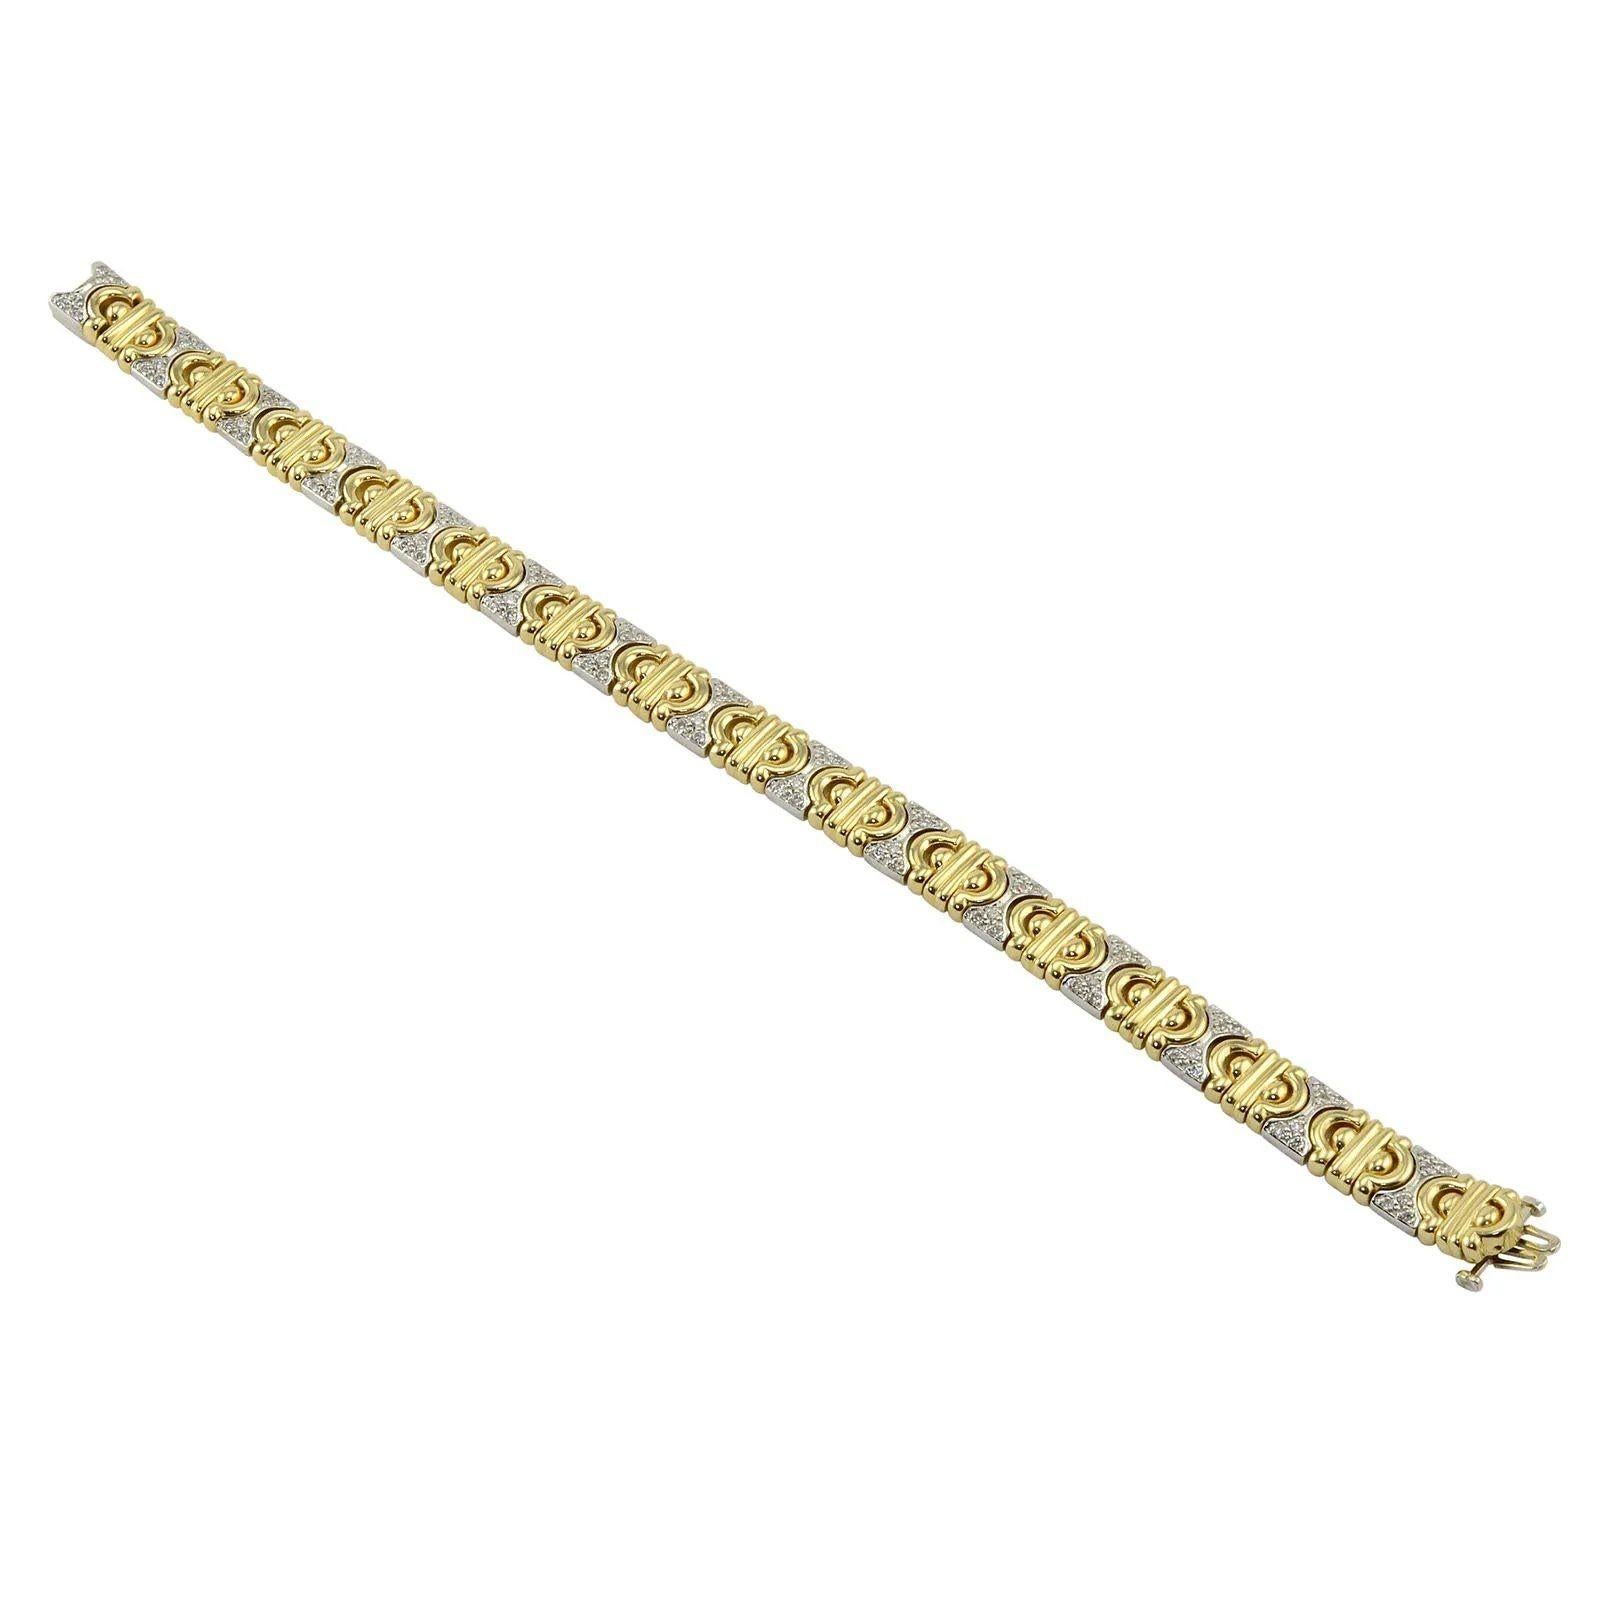 Estate Sonia B 1.17 CTW pave diamond hinged link bracelet. This 8-3/8 inch 14 karat yellow and white gold Sonia B bracelet has 90 full cut pave set diamonds at 1.17 carat total weight SI1-I1 clarity I-J color. This two tone gold diamond bracelet